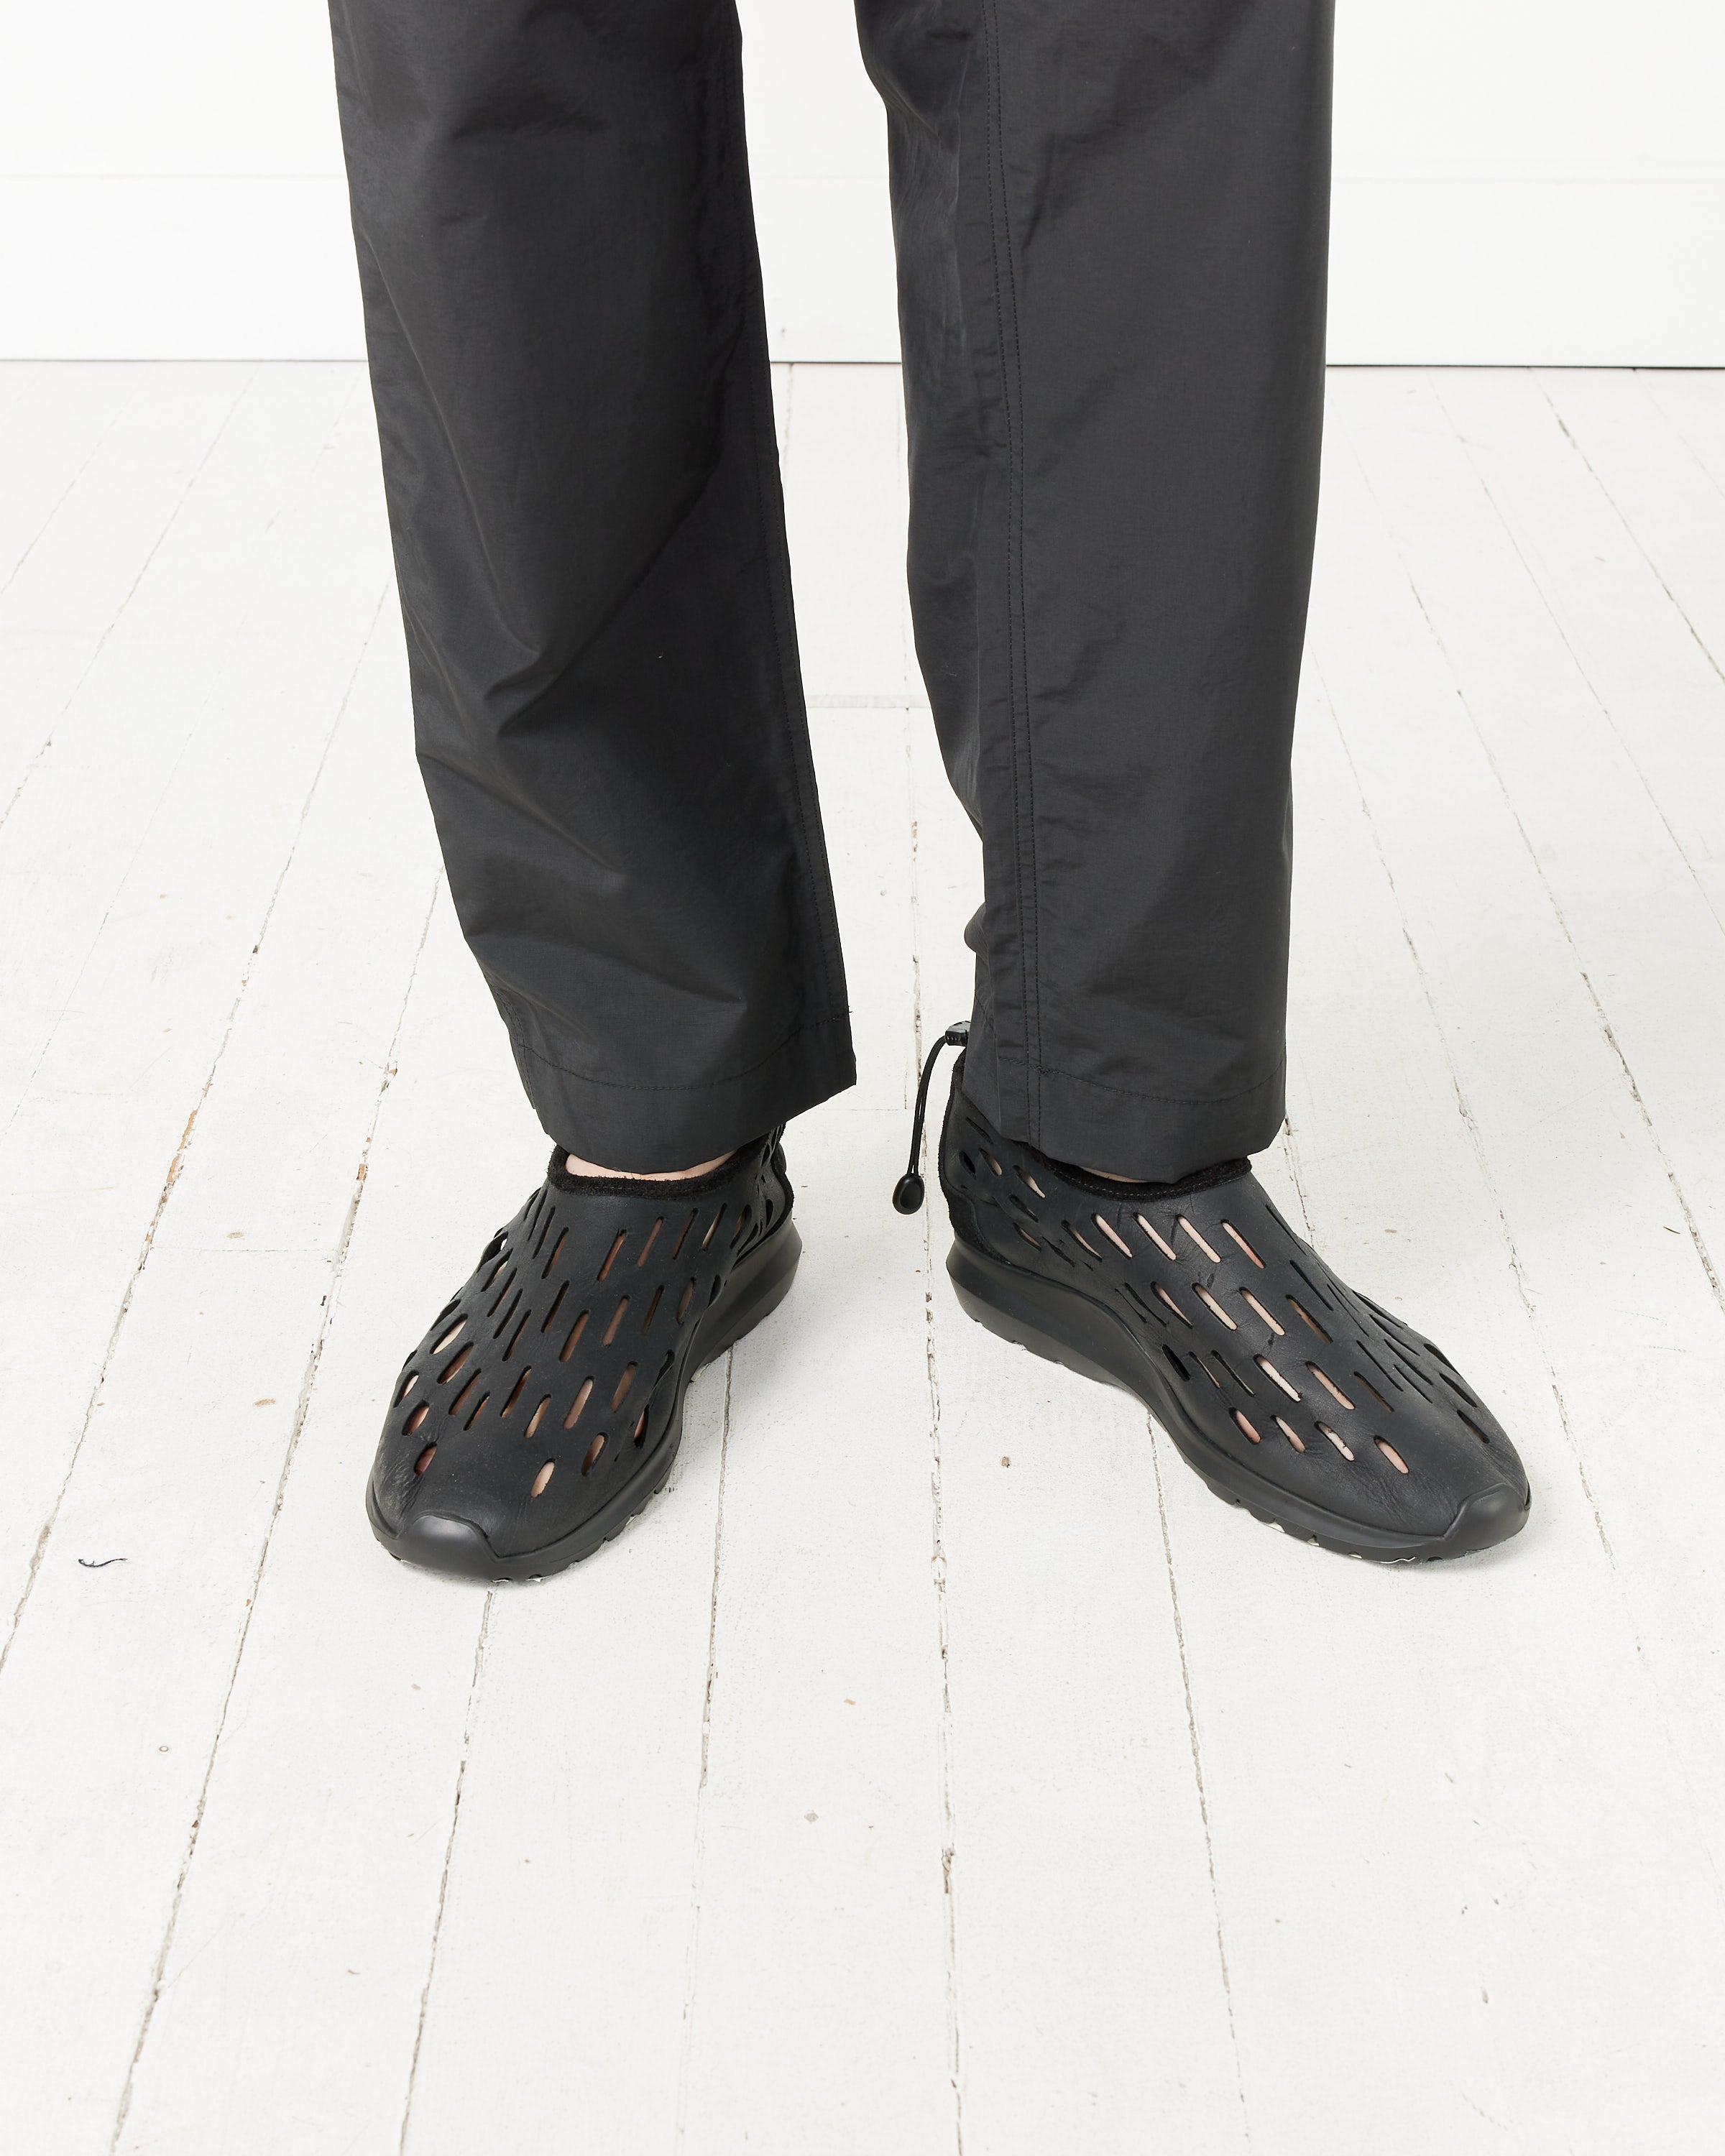 Strainer Shoes